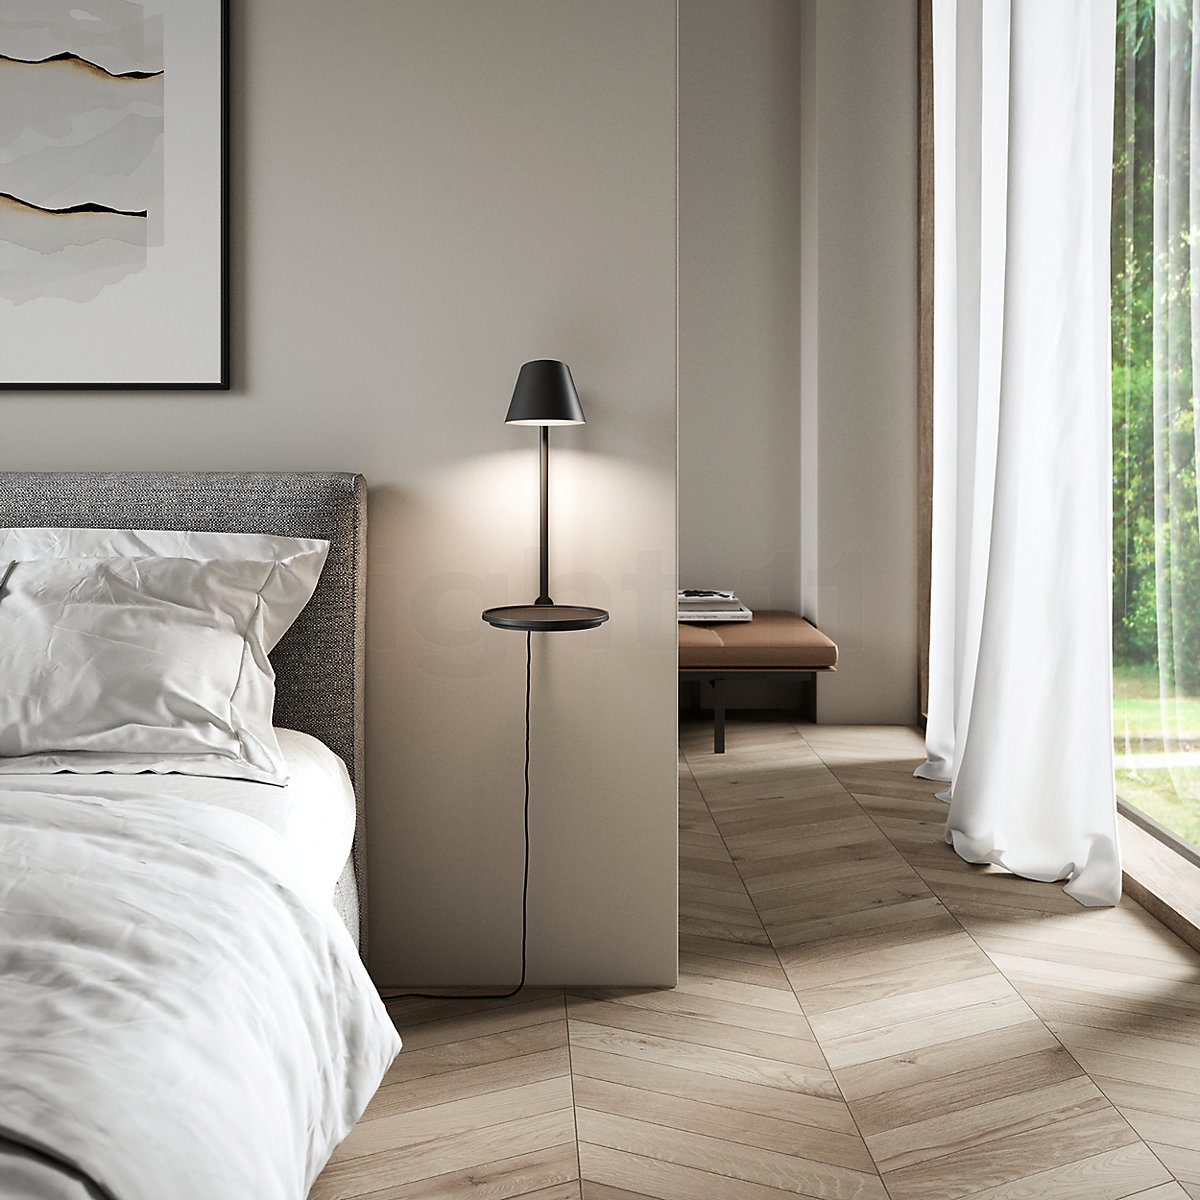 People Design the bei LED for kaufen Stay Wandleuchte